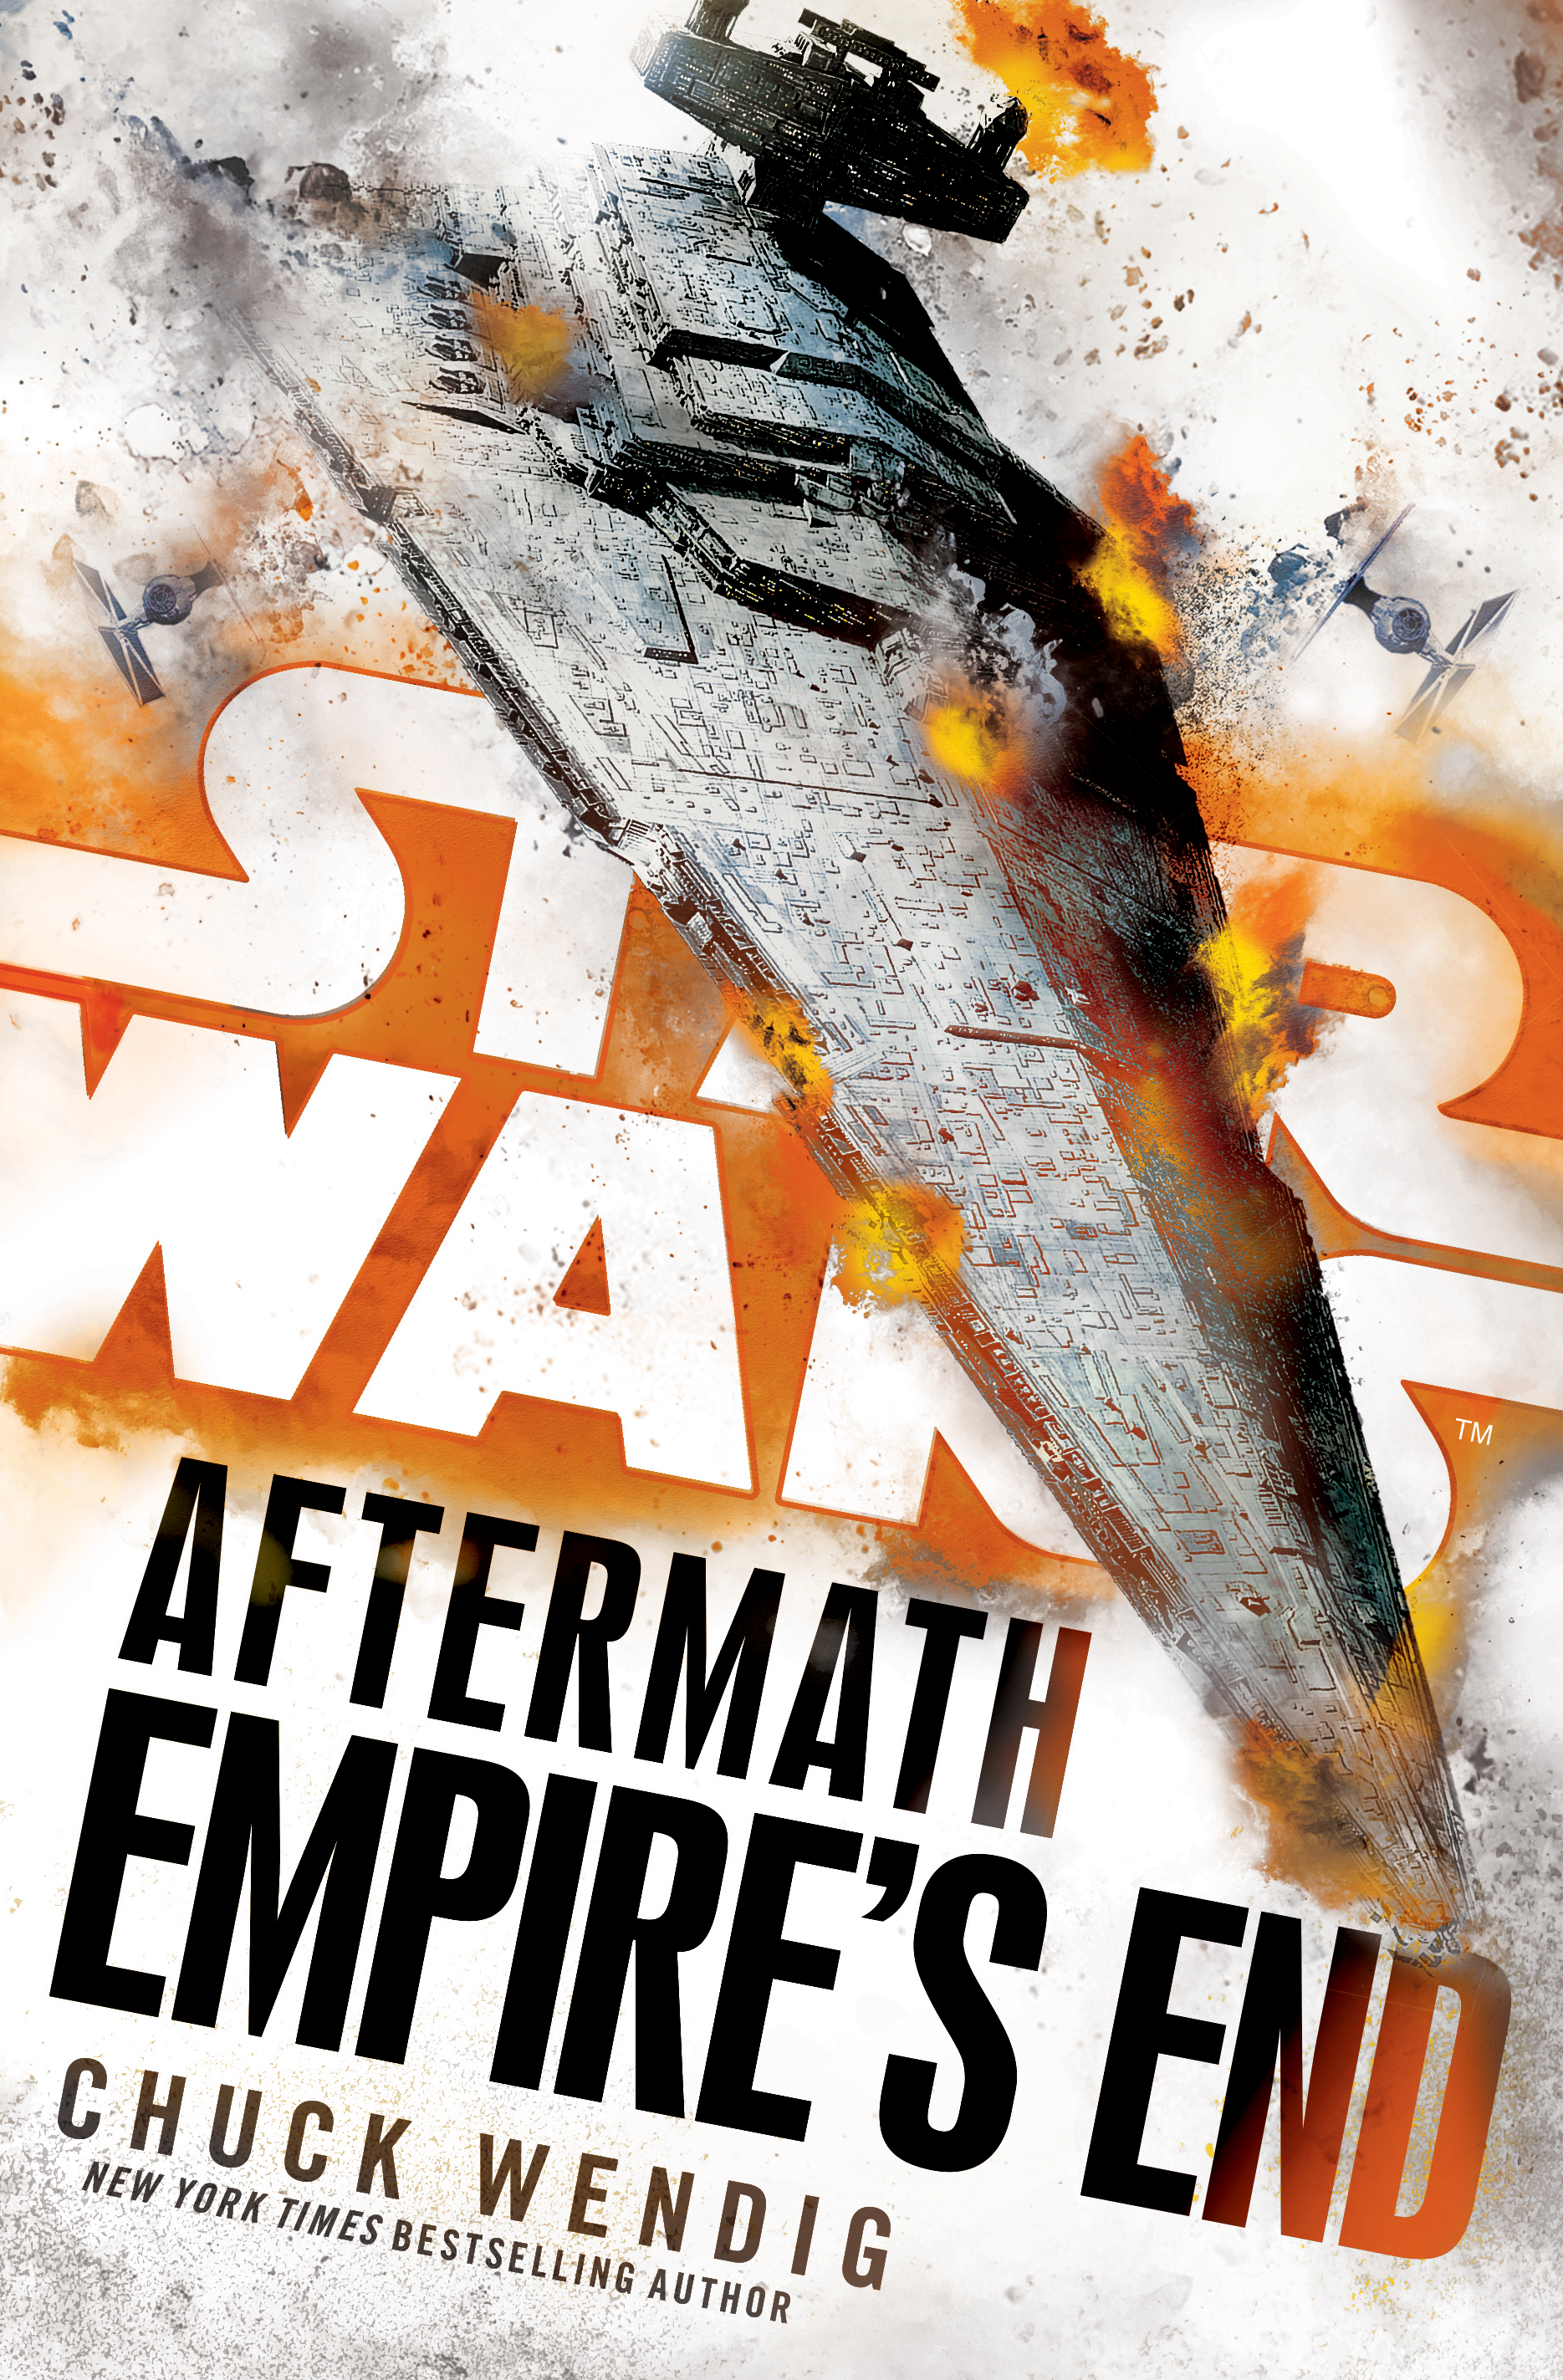 Star Wars Aftermath: Empire's End